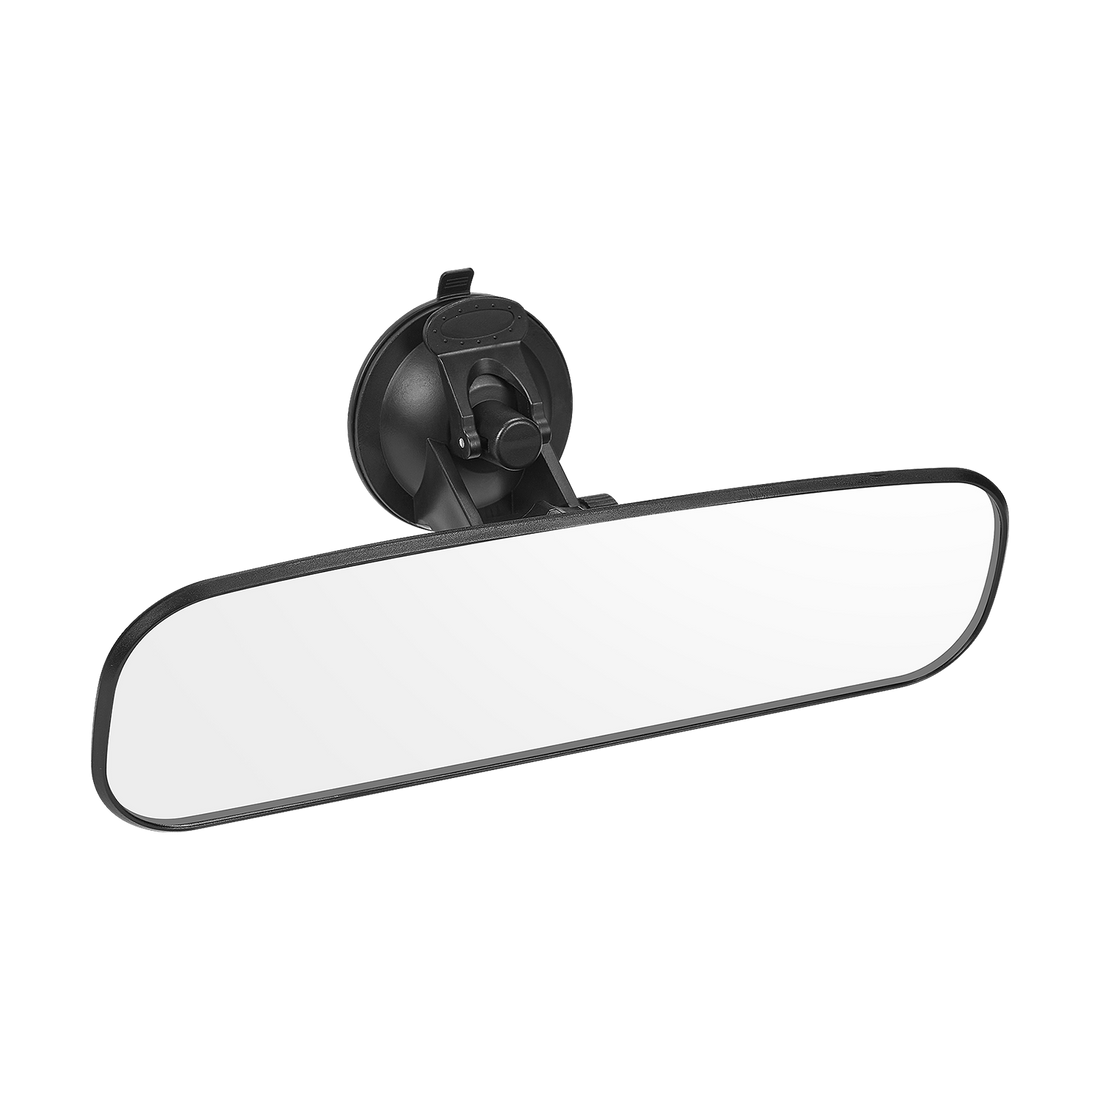 JOYTUTUS Rear View Mirror With Adjustable Suction Cup, Universal HD Thickened Wide Angle Mirror